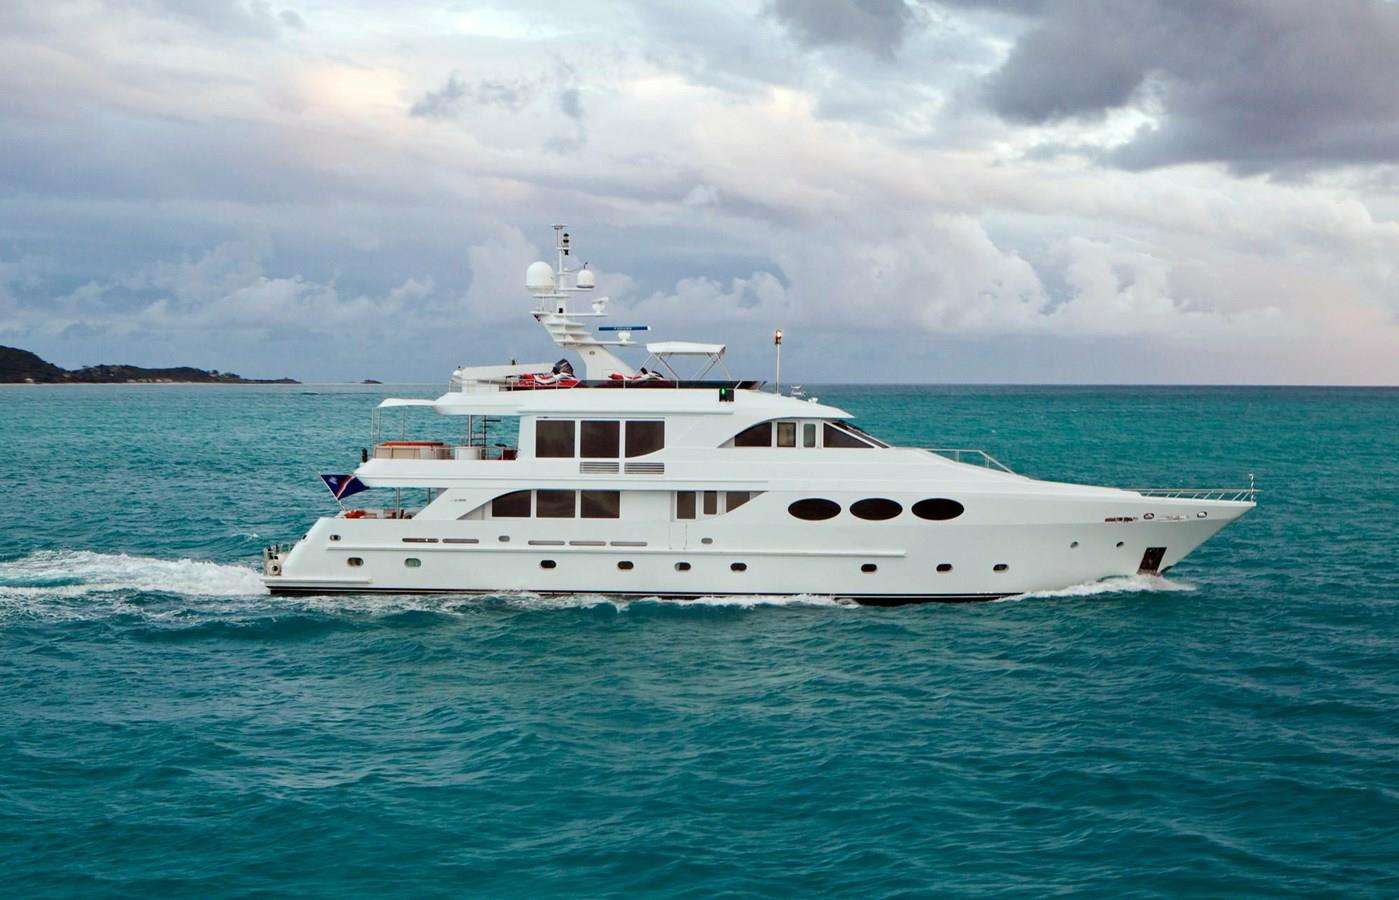 LAST CALL Yacht Charter - Ritzy Charters